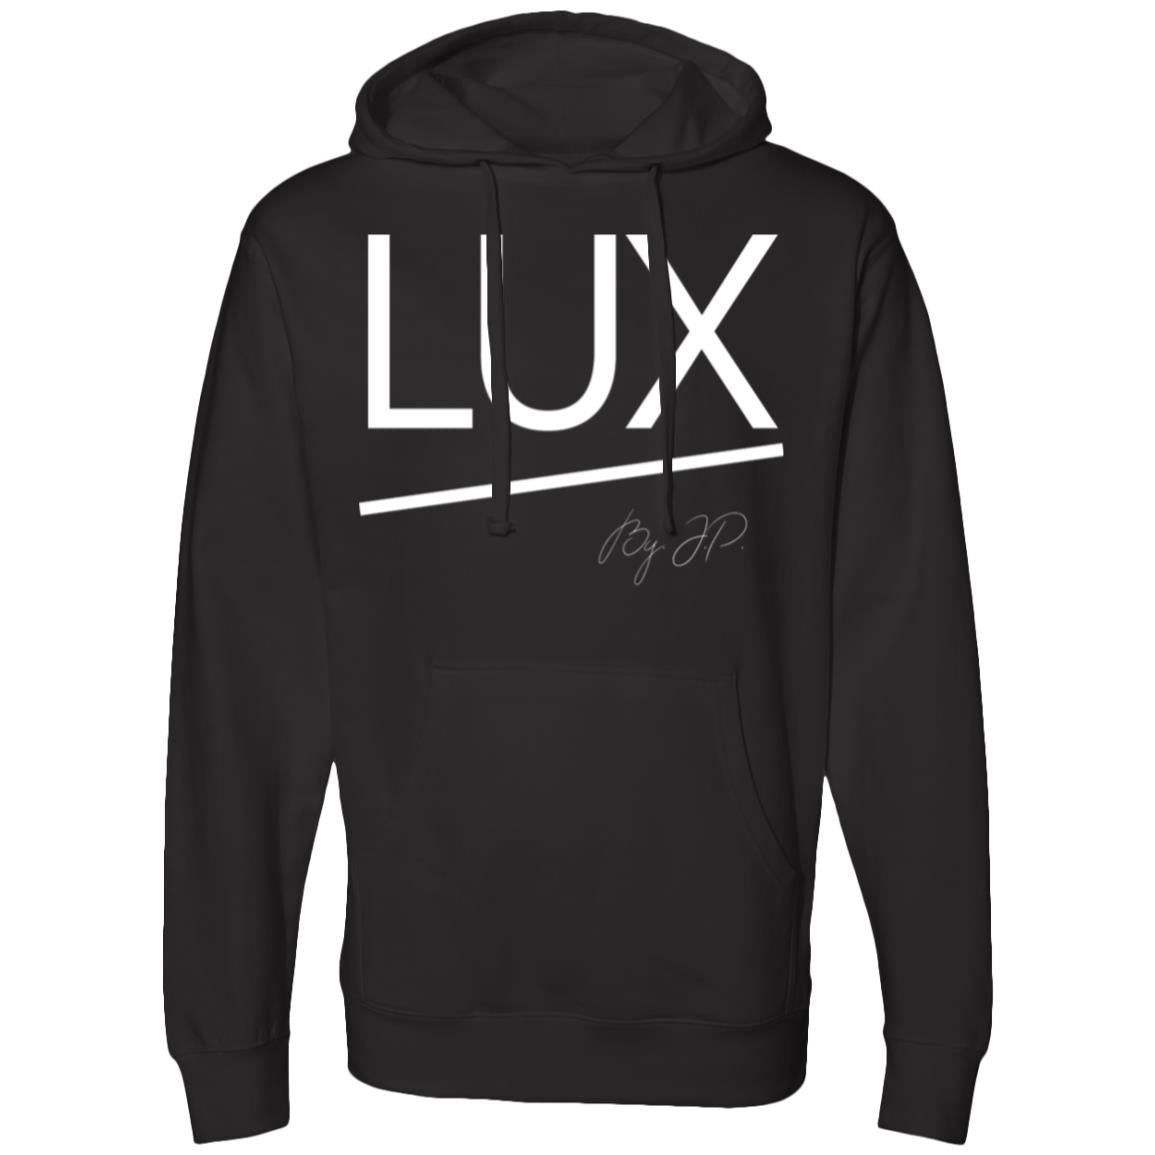 Lux. Midweight Hoodie - Black Edition